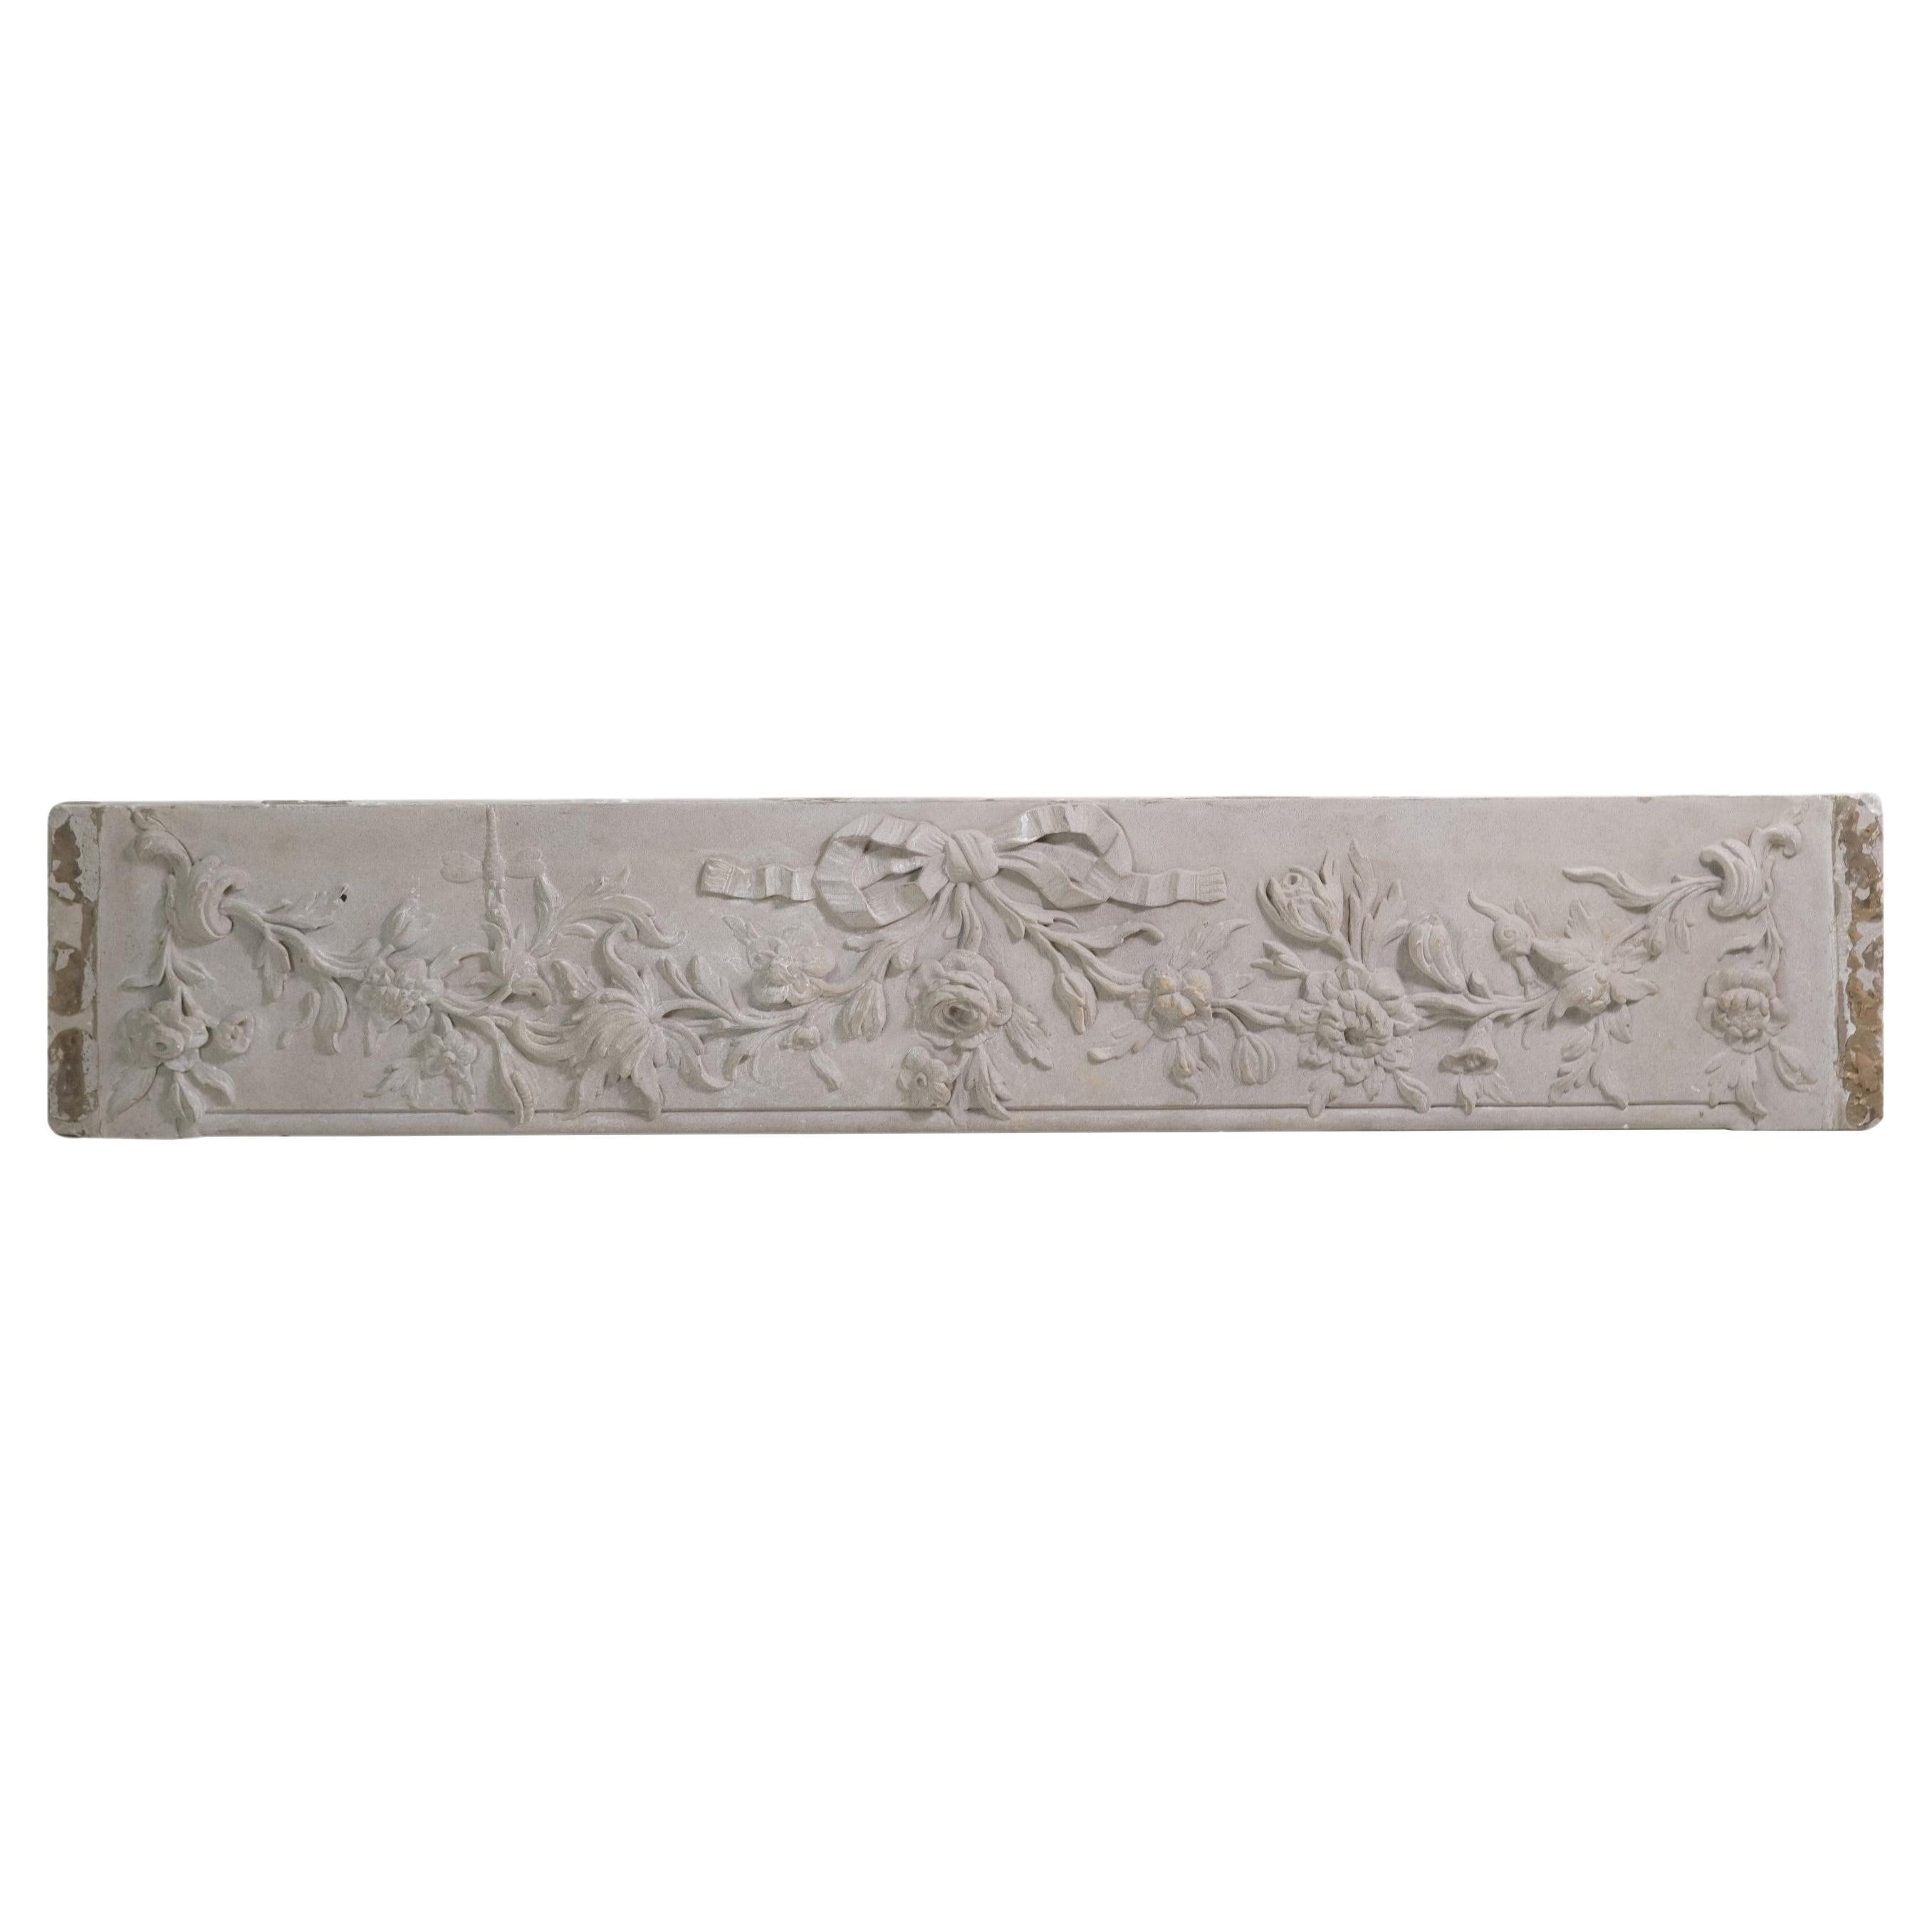 Hand Carved Building Stone Frieze Ribbon & Floral Swags For Sale